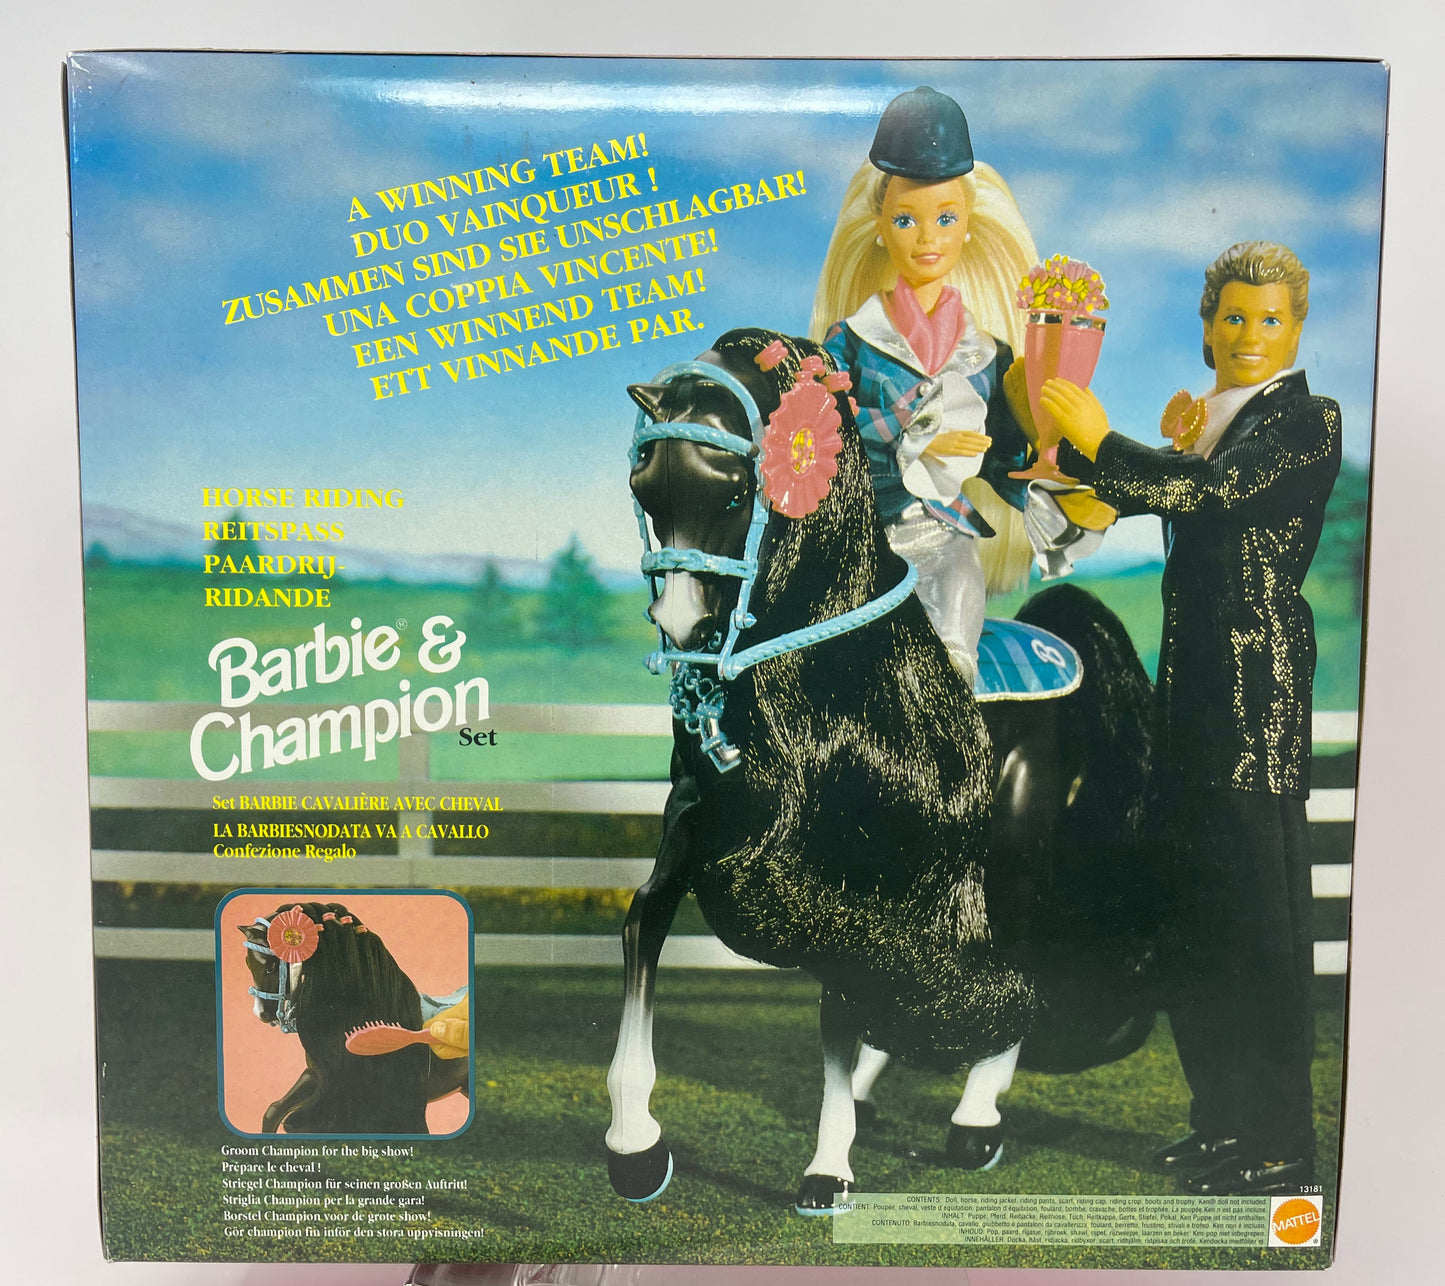 BARBIE & CHAMPION #13181 - MADE IN ITALY - MATTEL 1994